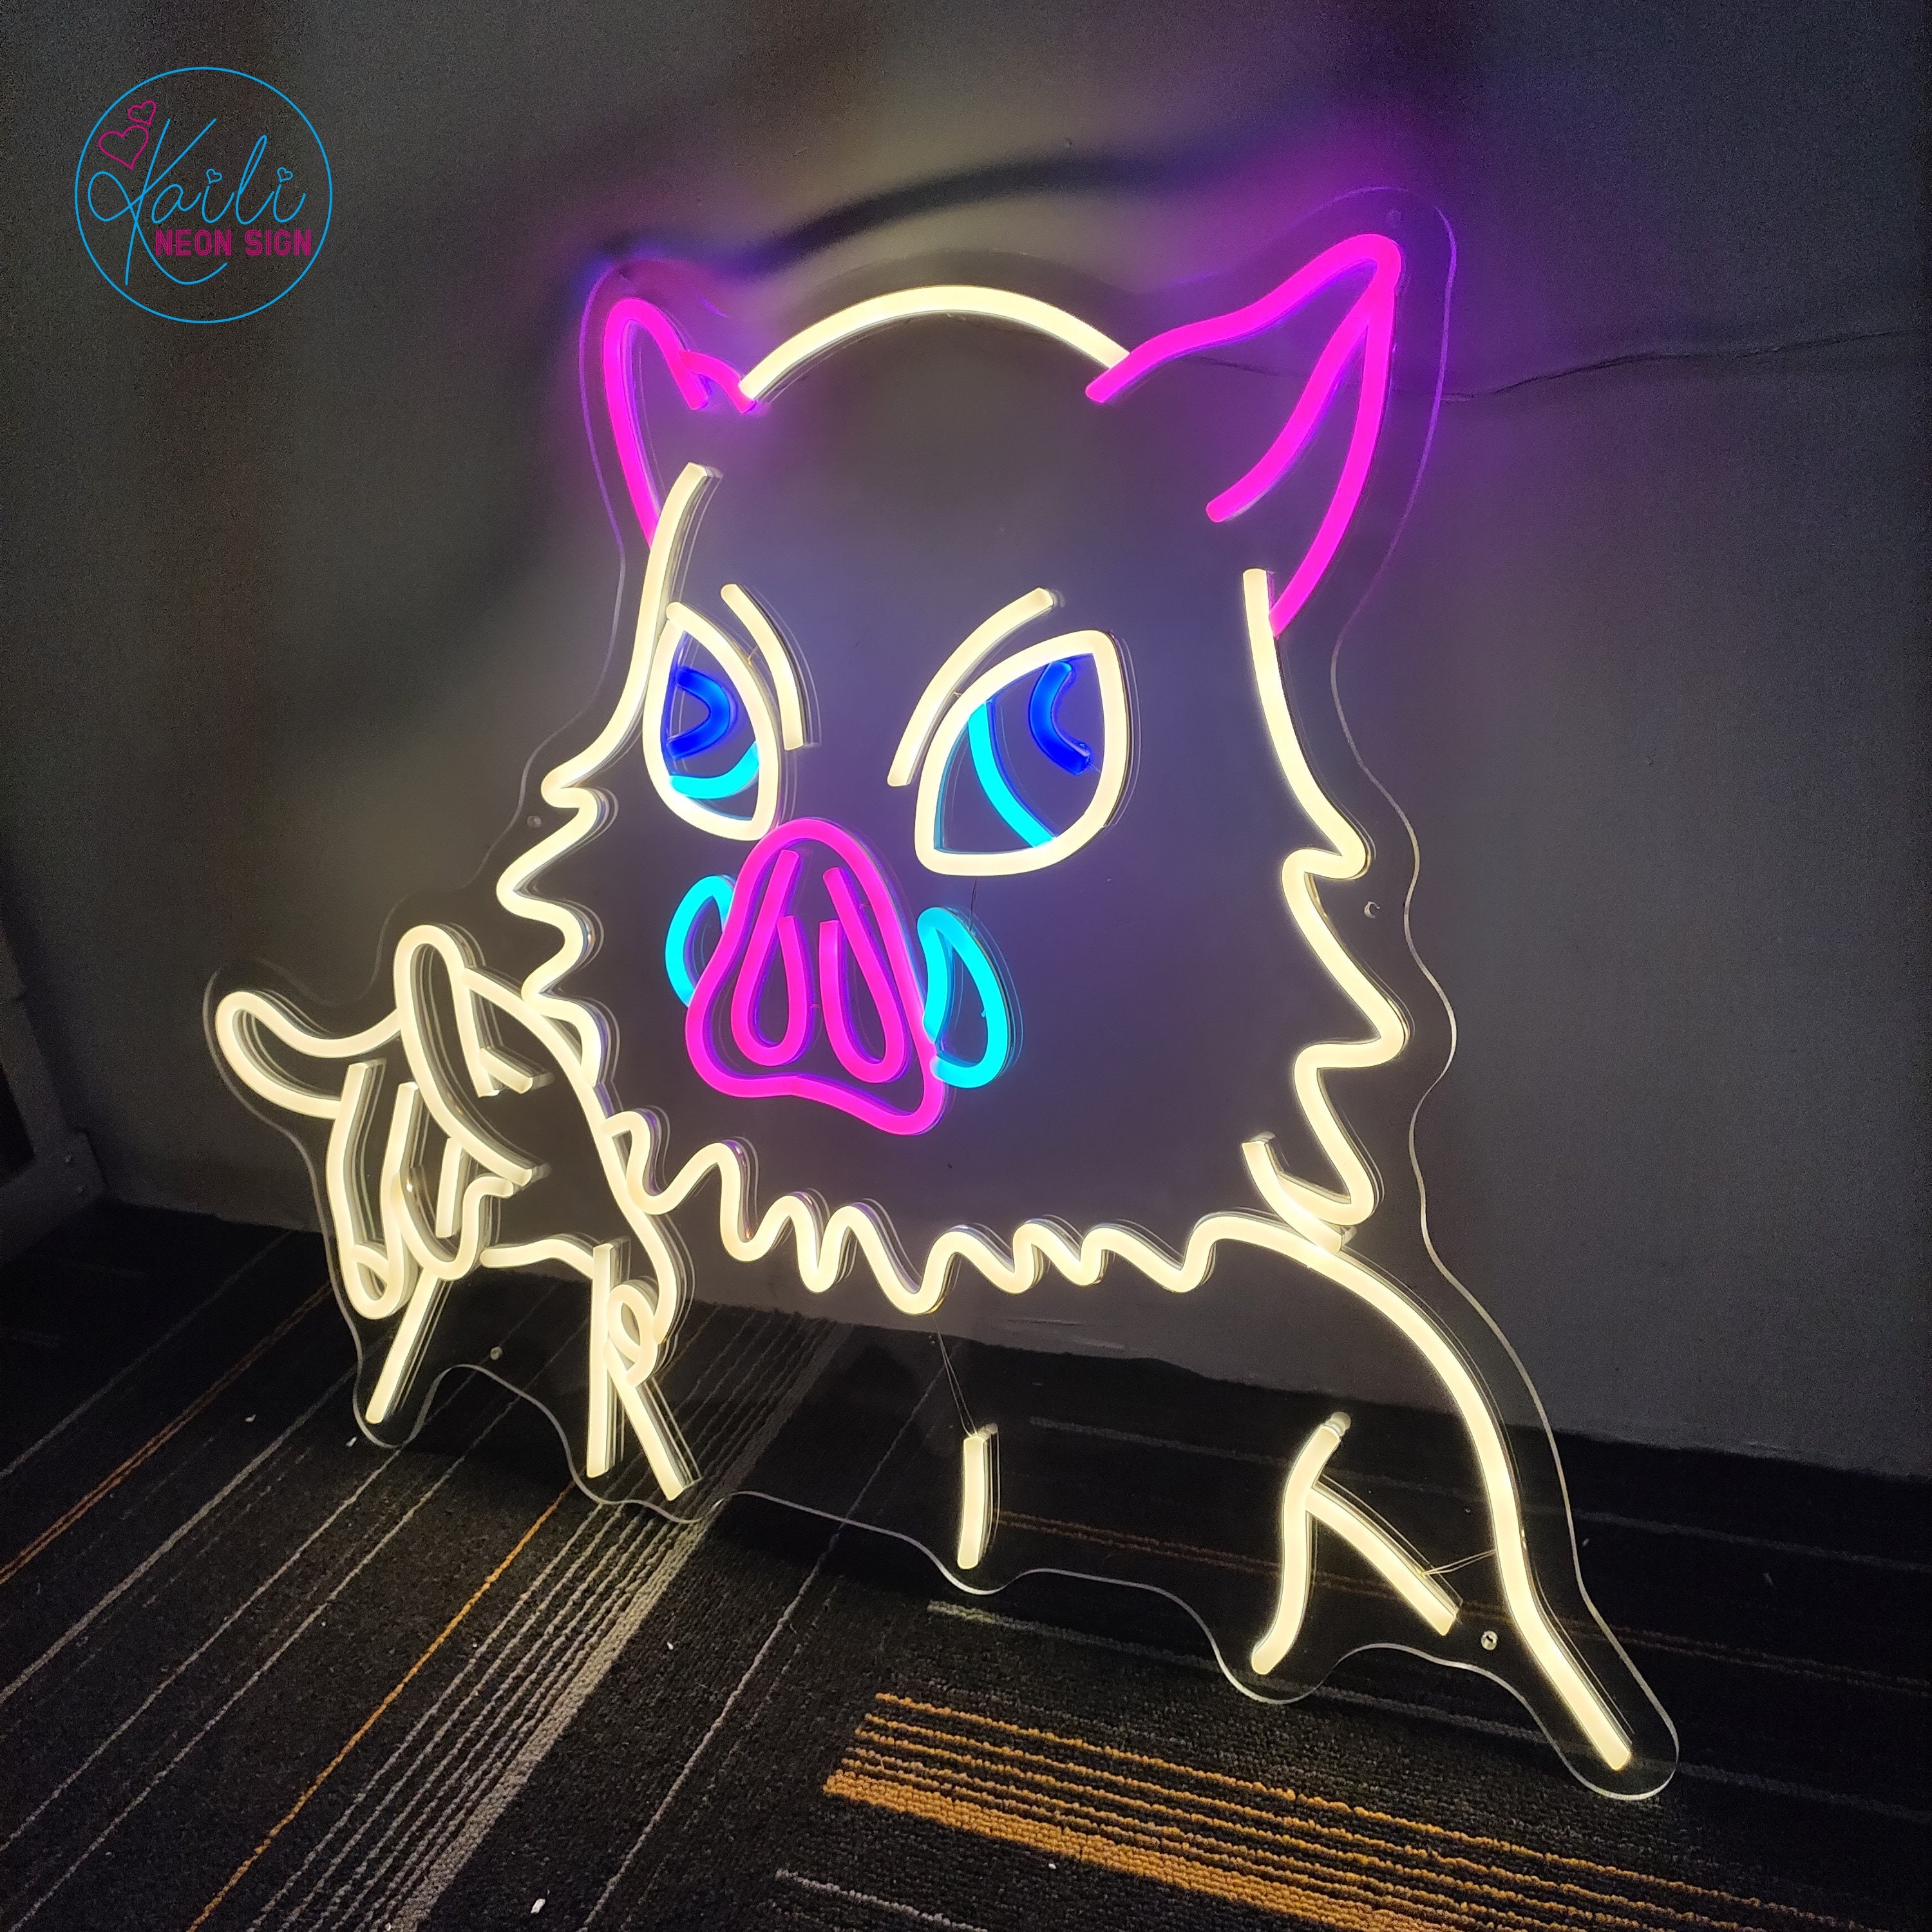 Kingdom Hearts Anime LED Silhouette Backlight Modern Light Vinyl Clock  Color Change Lamp Remote Control Record Nightlight  Price history  Review   AliExpress Seller  DARBY JOAR Store  Alitoolsio